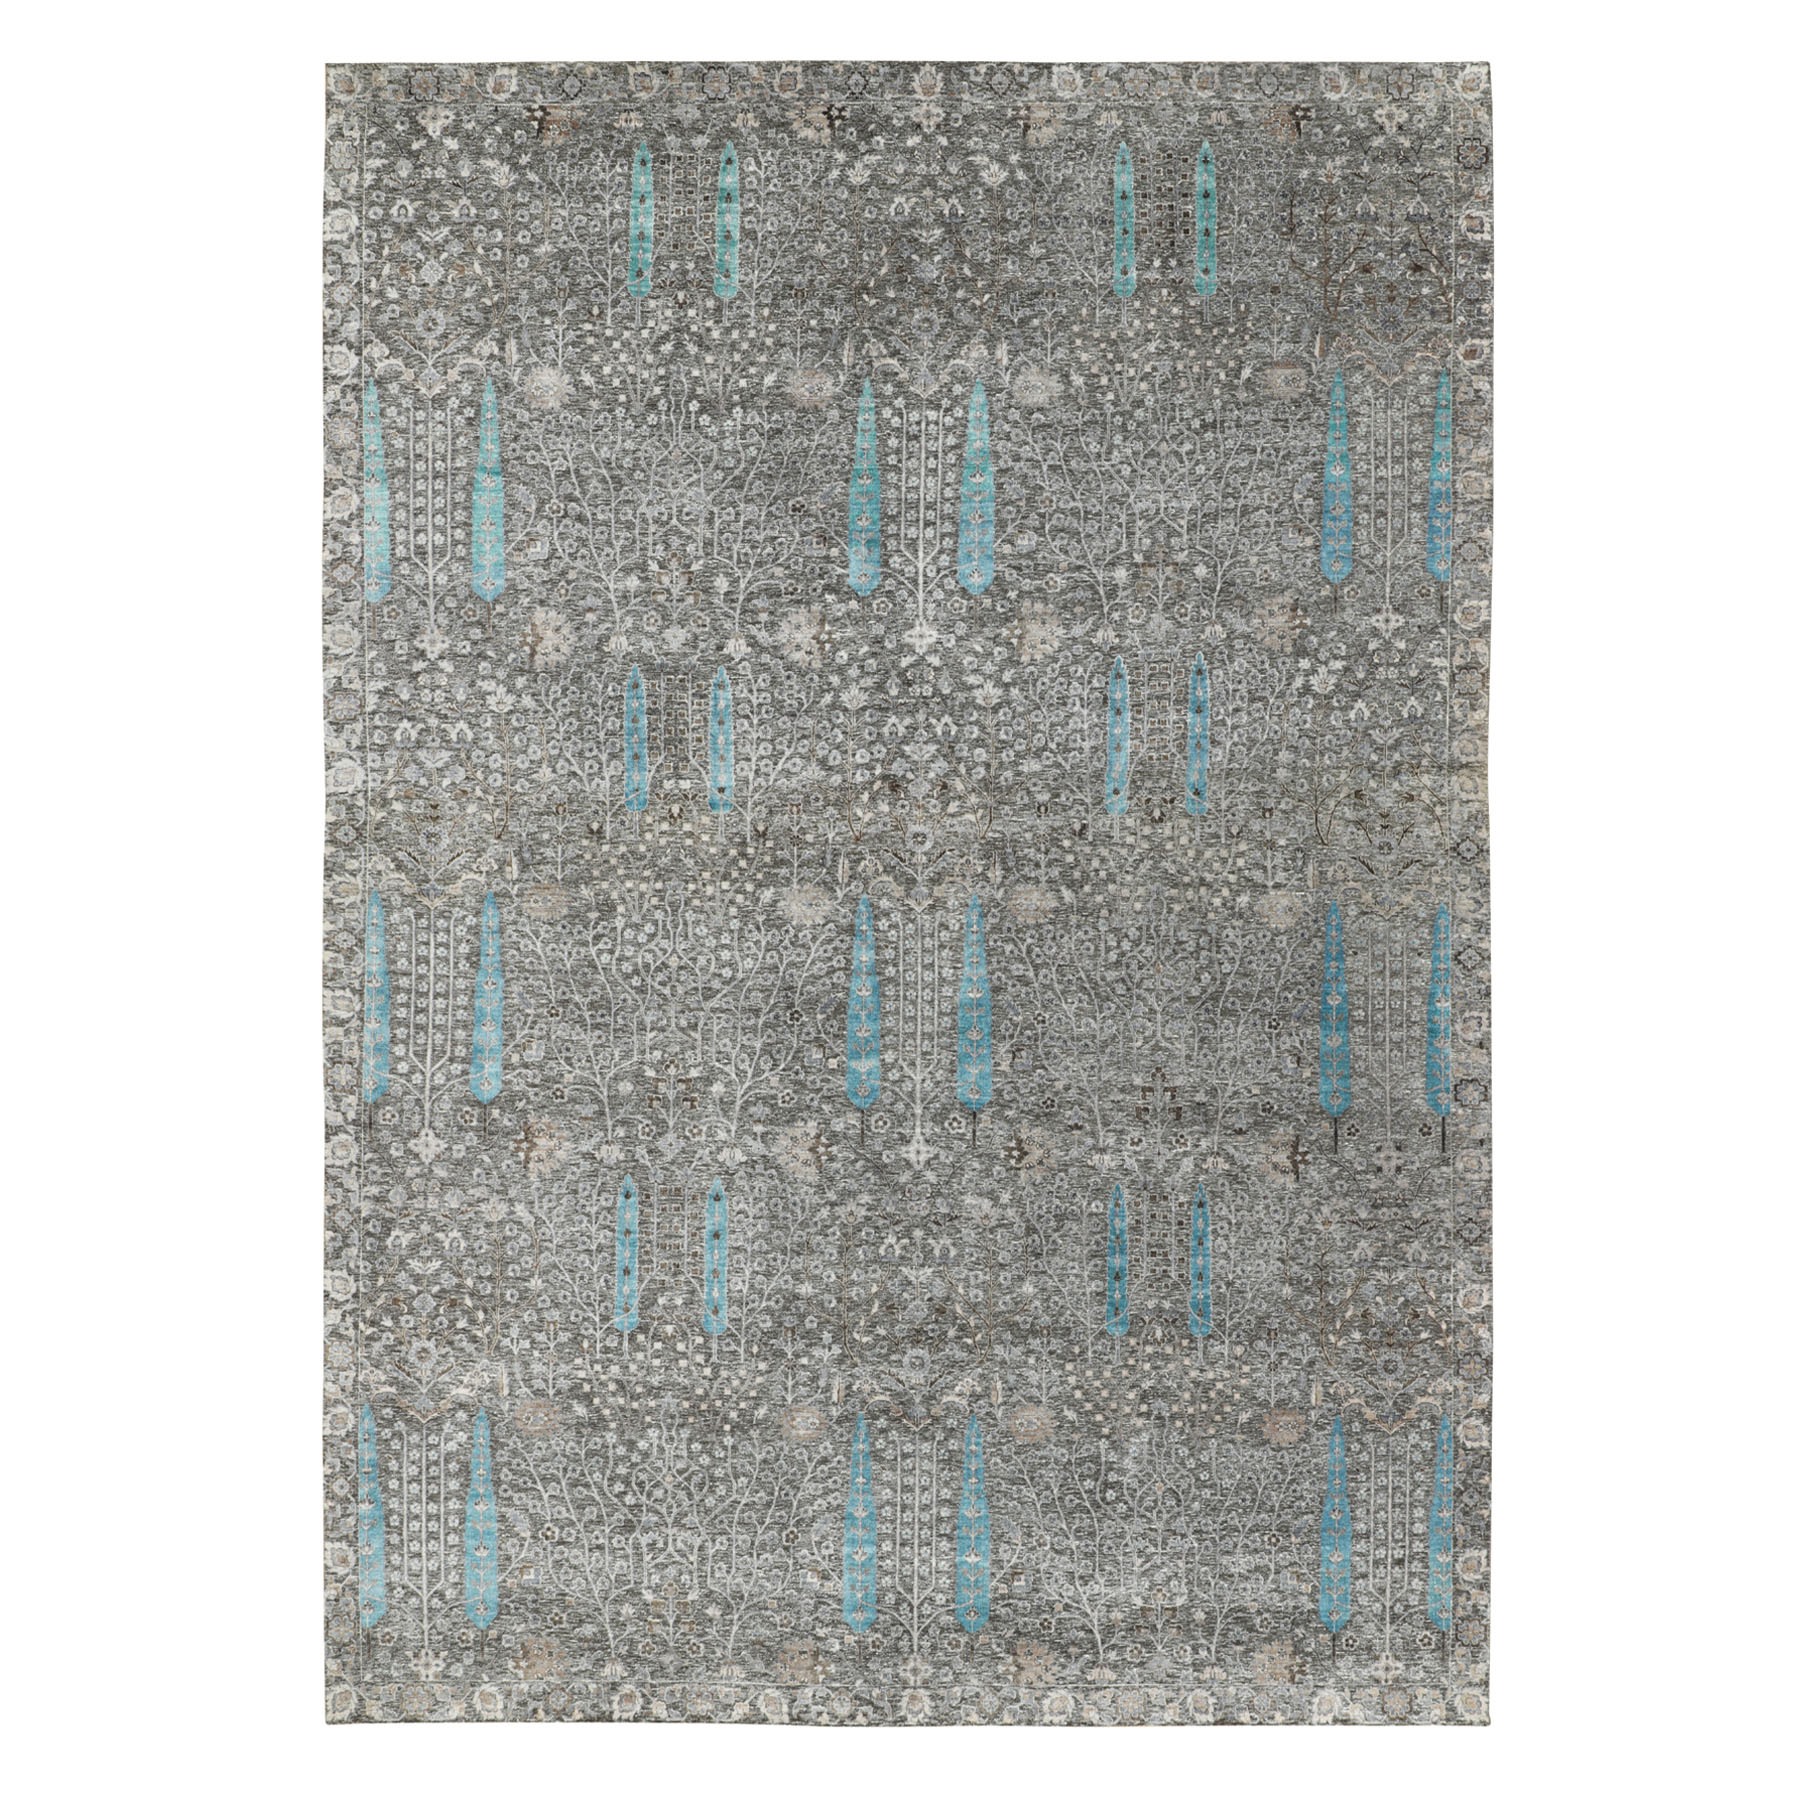 12'x17'9" Oversized Cypress Tree Design Silk with Textured Wool Hand Woven Oriental Rug 